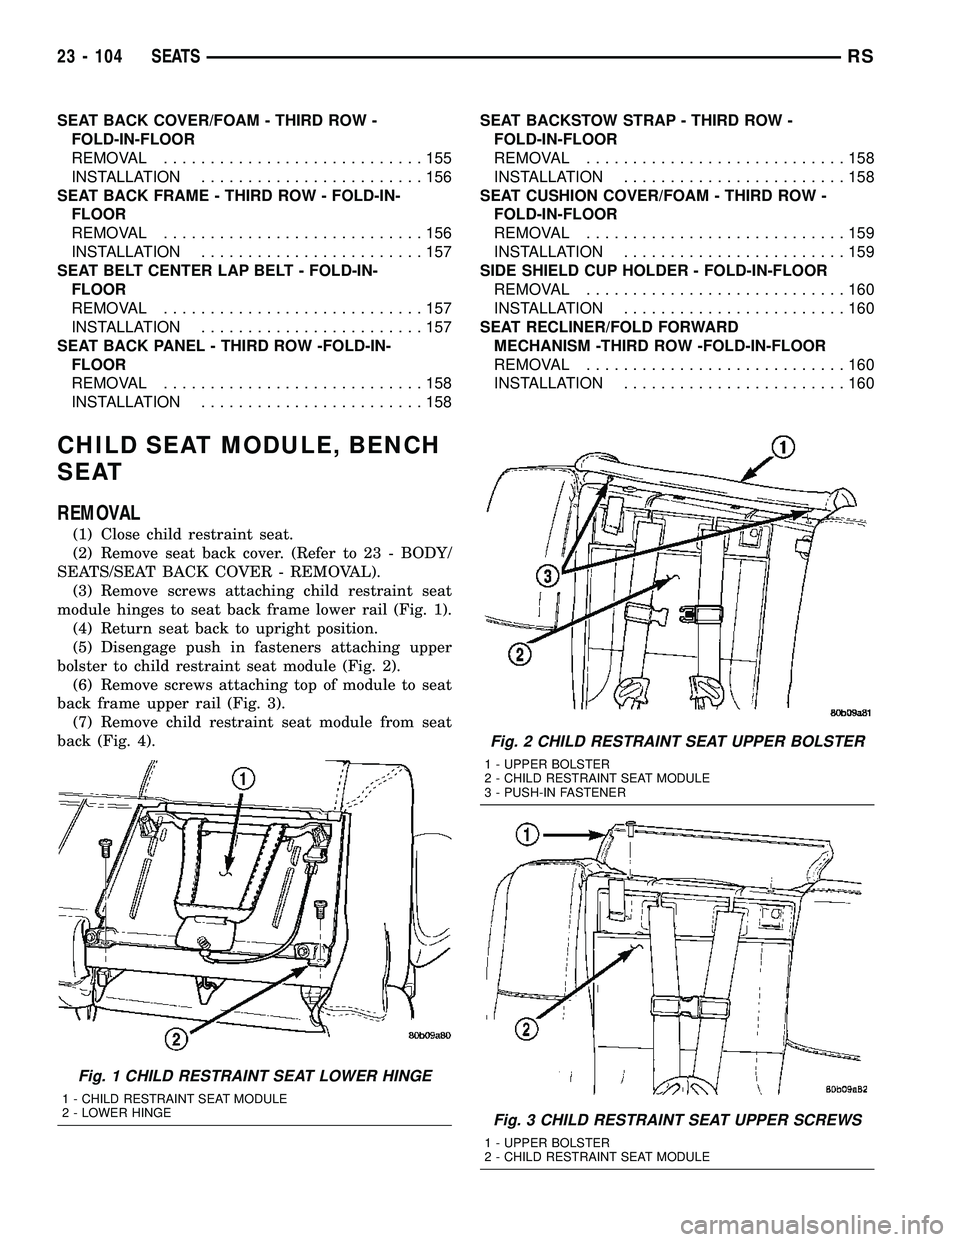 CHRYSLER VOYAGER 2005 User Guide SEAT BACK COVER/FOAM - THIRD ROW -
FOLD-IN-FLOOR
REMOVAL............................155
INSTALLATION........................156
SEAT BACK FRAME - THIRD ROW - FOLD-IN-
FLOOR
REMOVAL....................